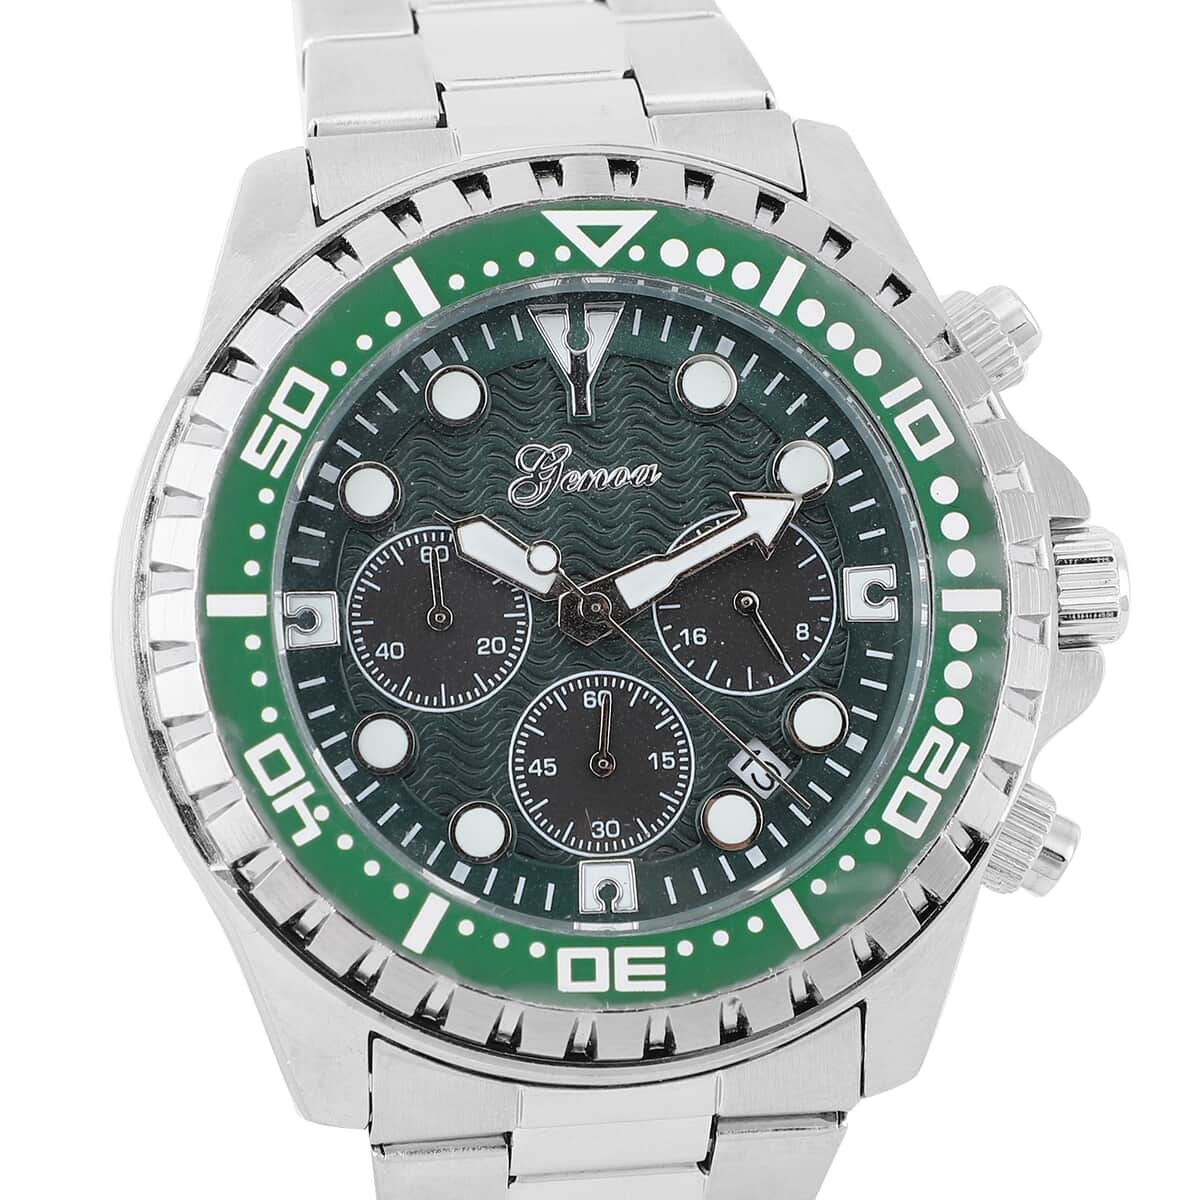 Genoa Multi-functional Quartz Movement Watch with Green Dial & Stainless Steel Strap (46 mm) image number 3